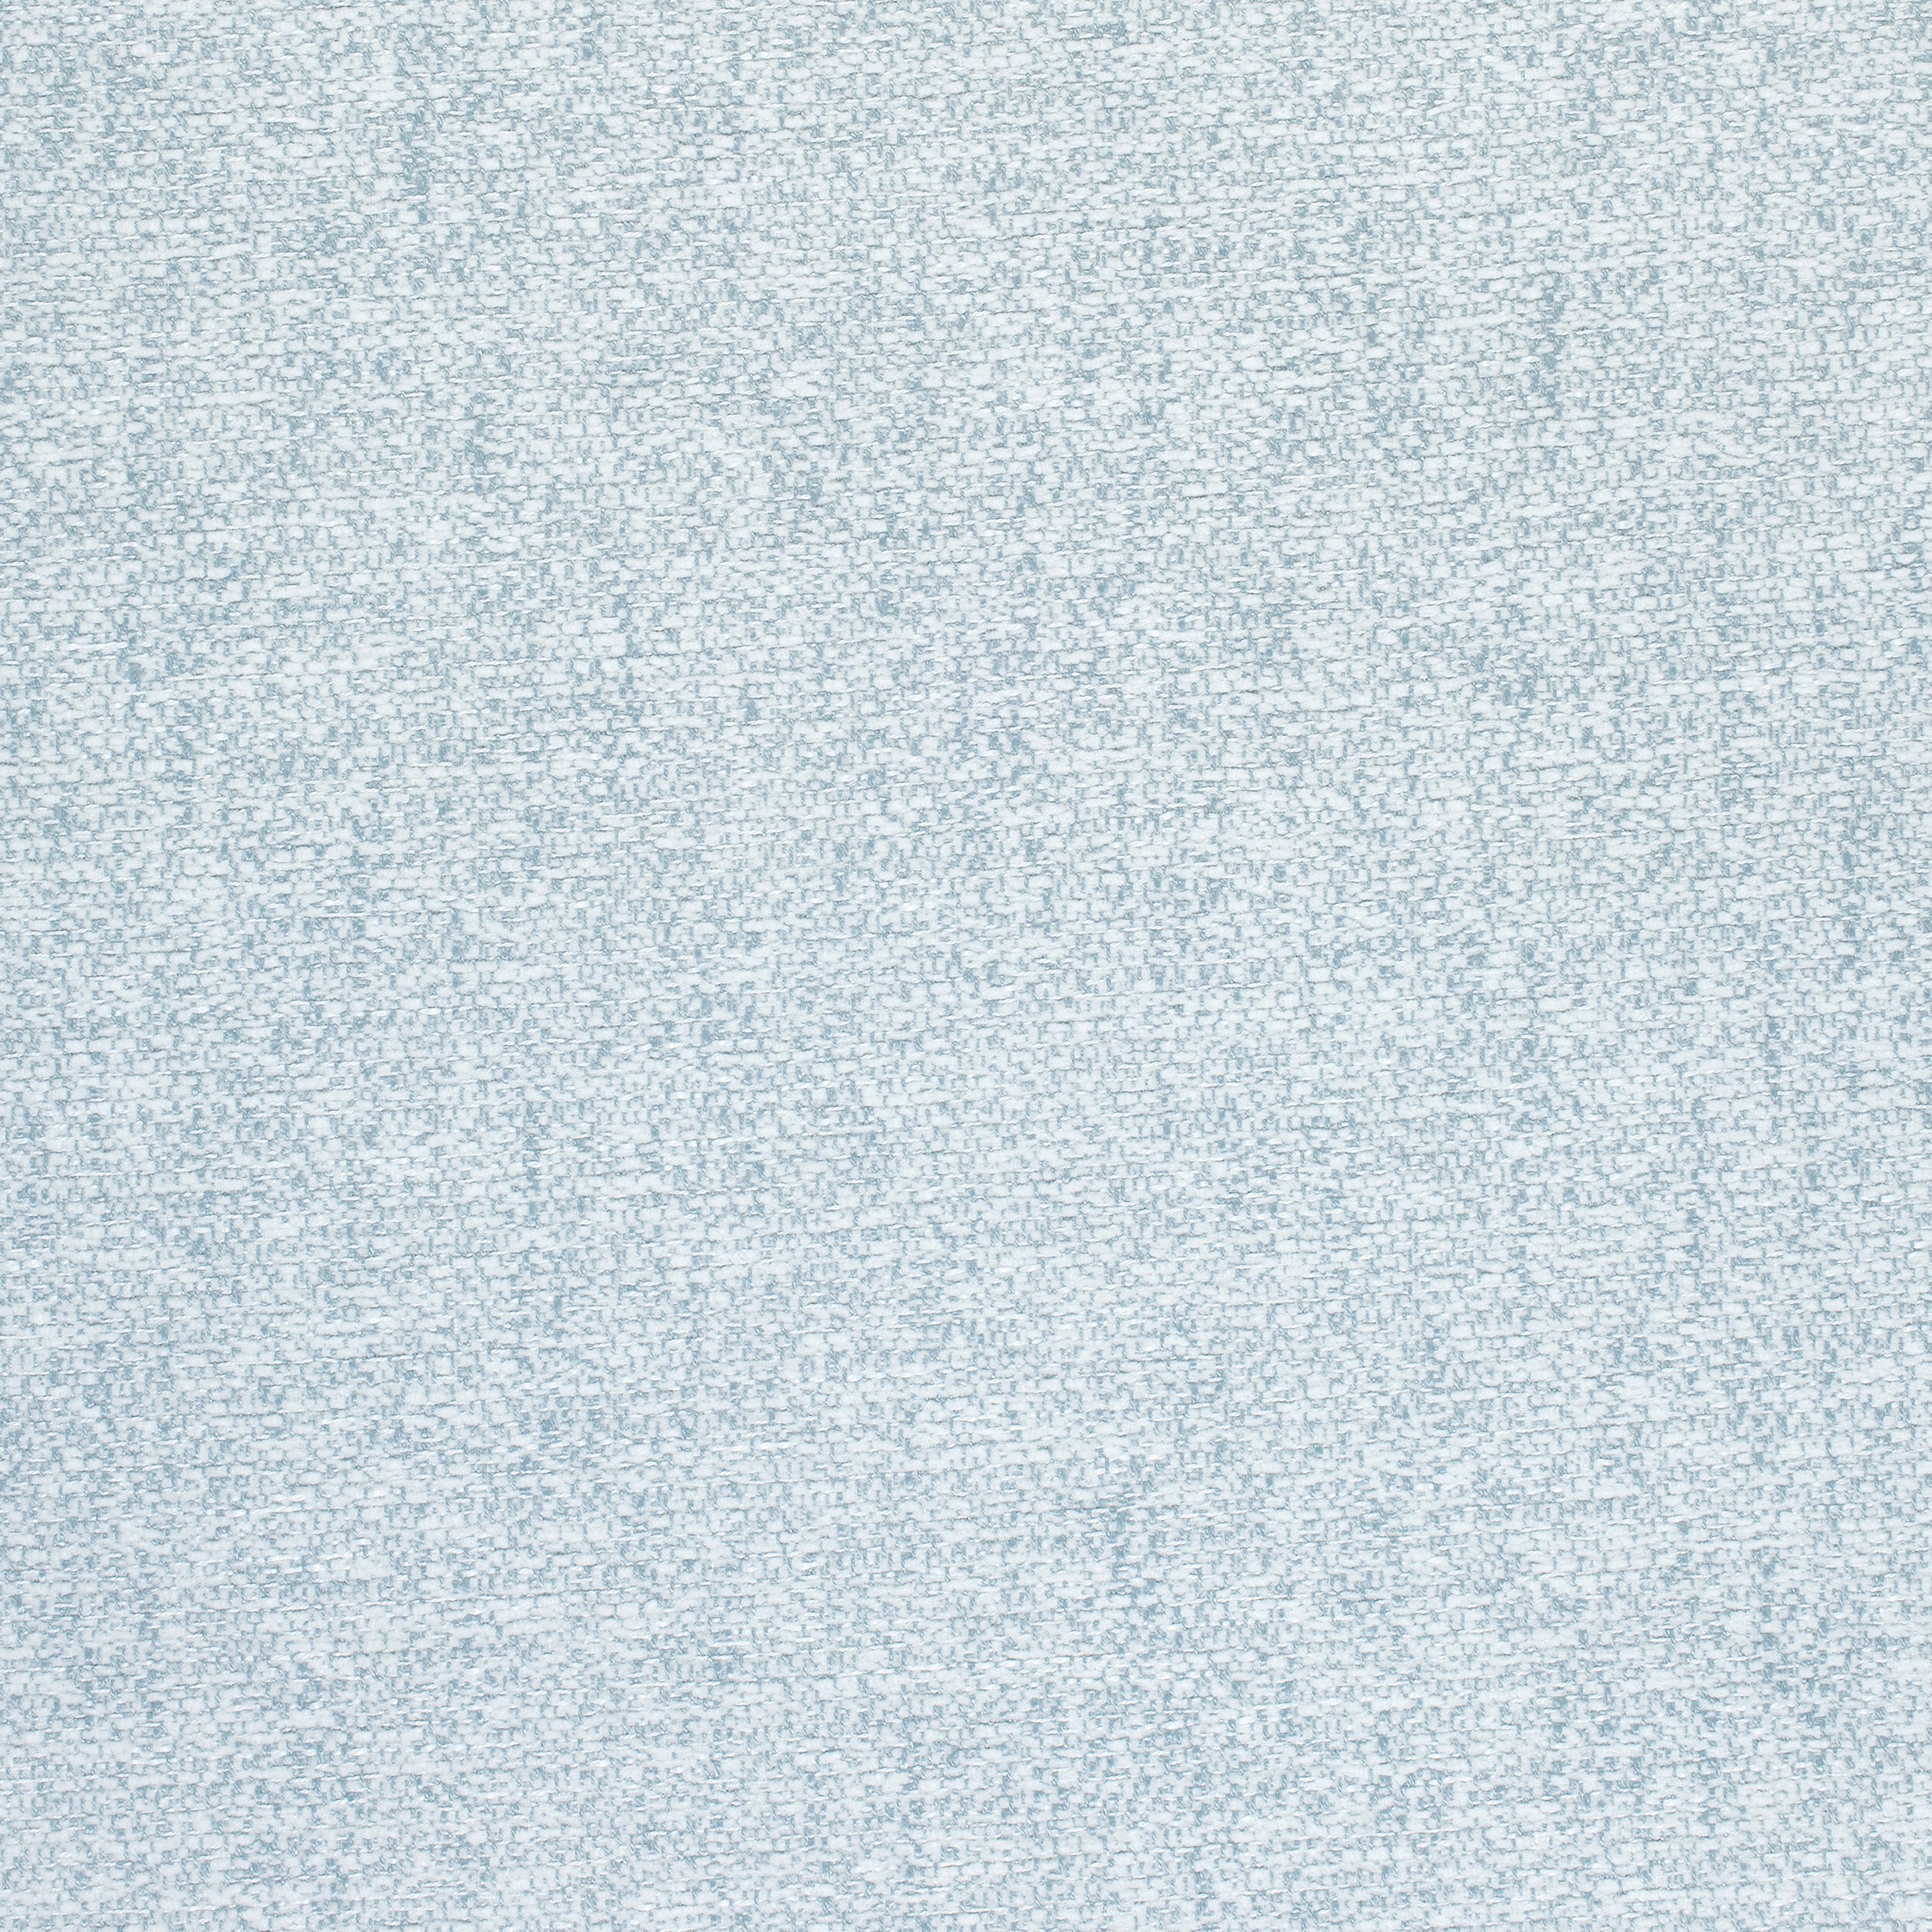 Shiloh fabric in heather aqua color - pattern number W789117 - by Thibaut in the Reverie collection